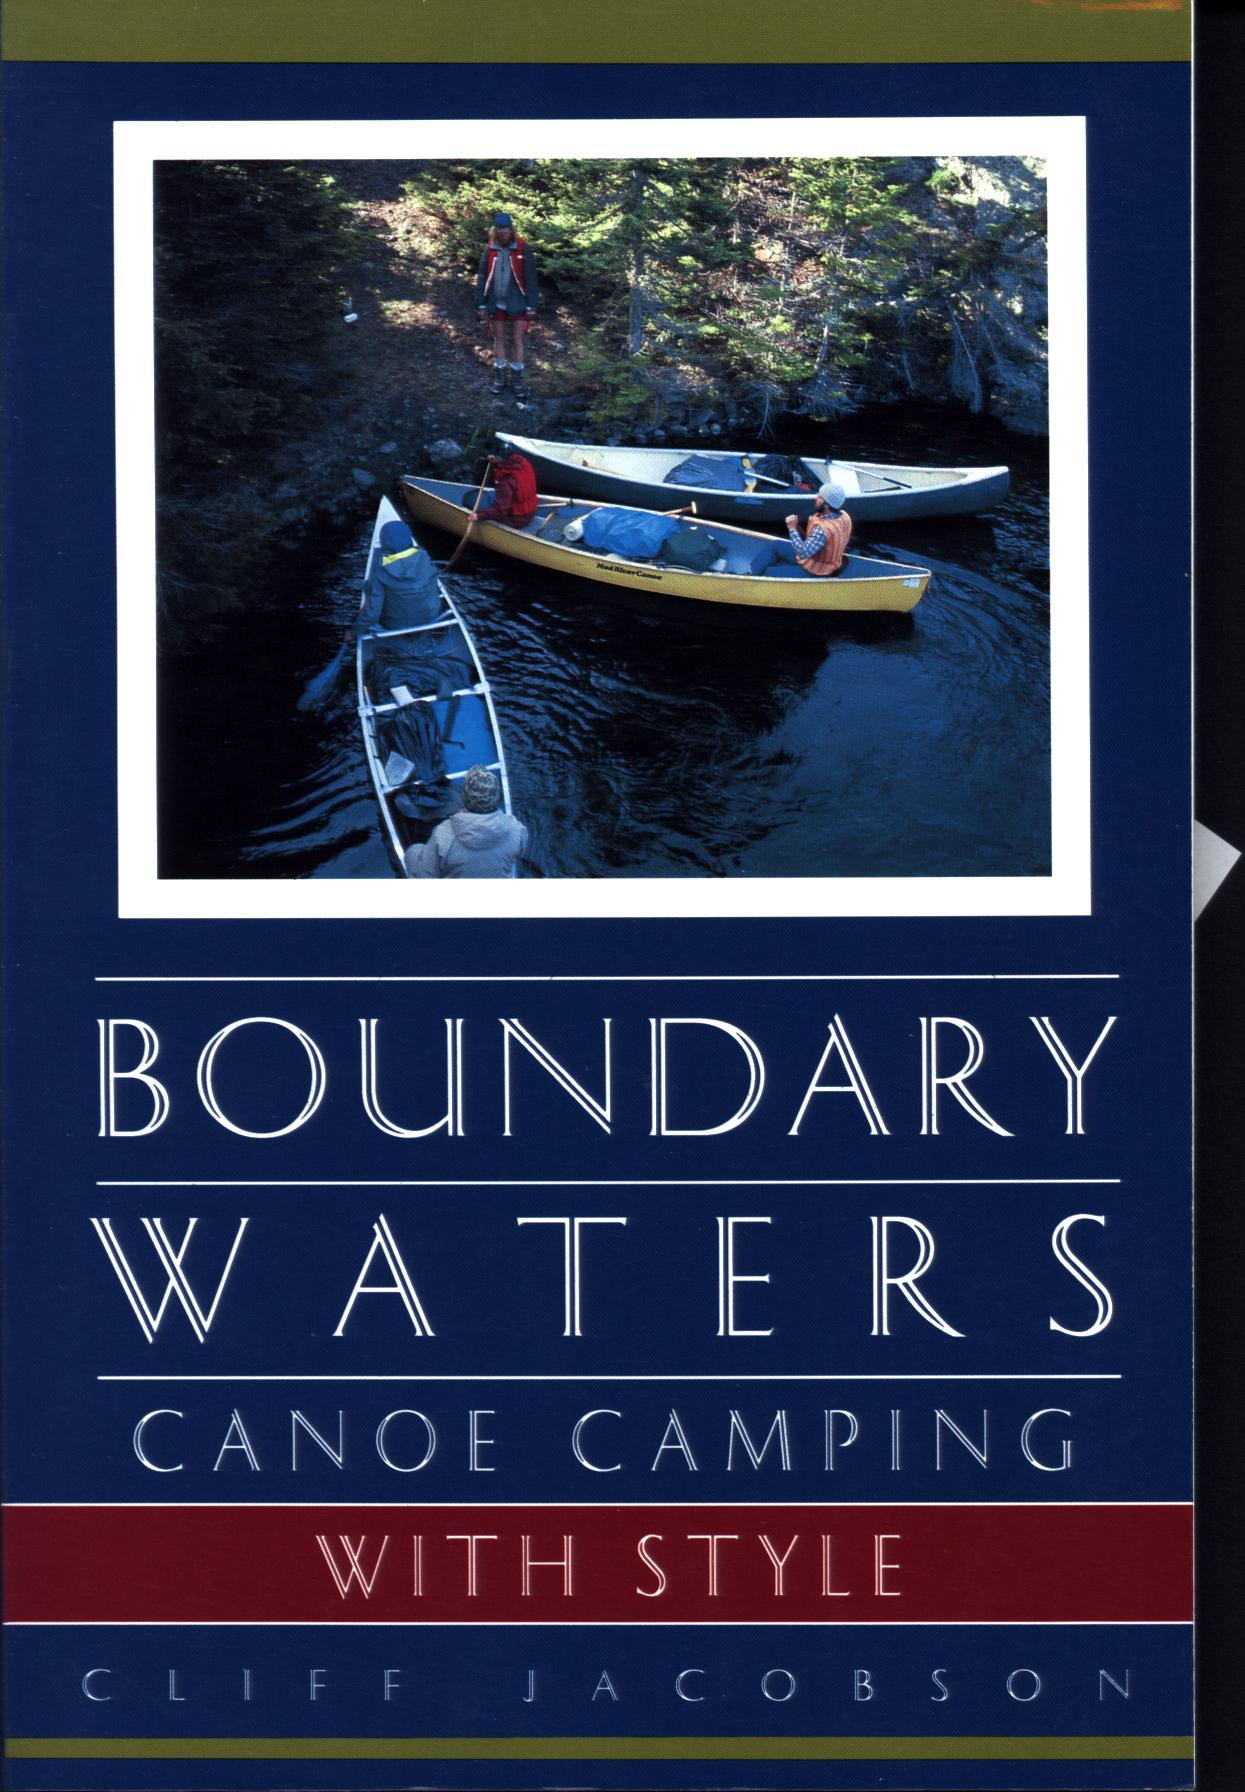 BOUNDARY WATERS CANOE CAMPING WITH STYLE. 